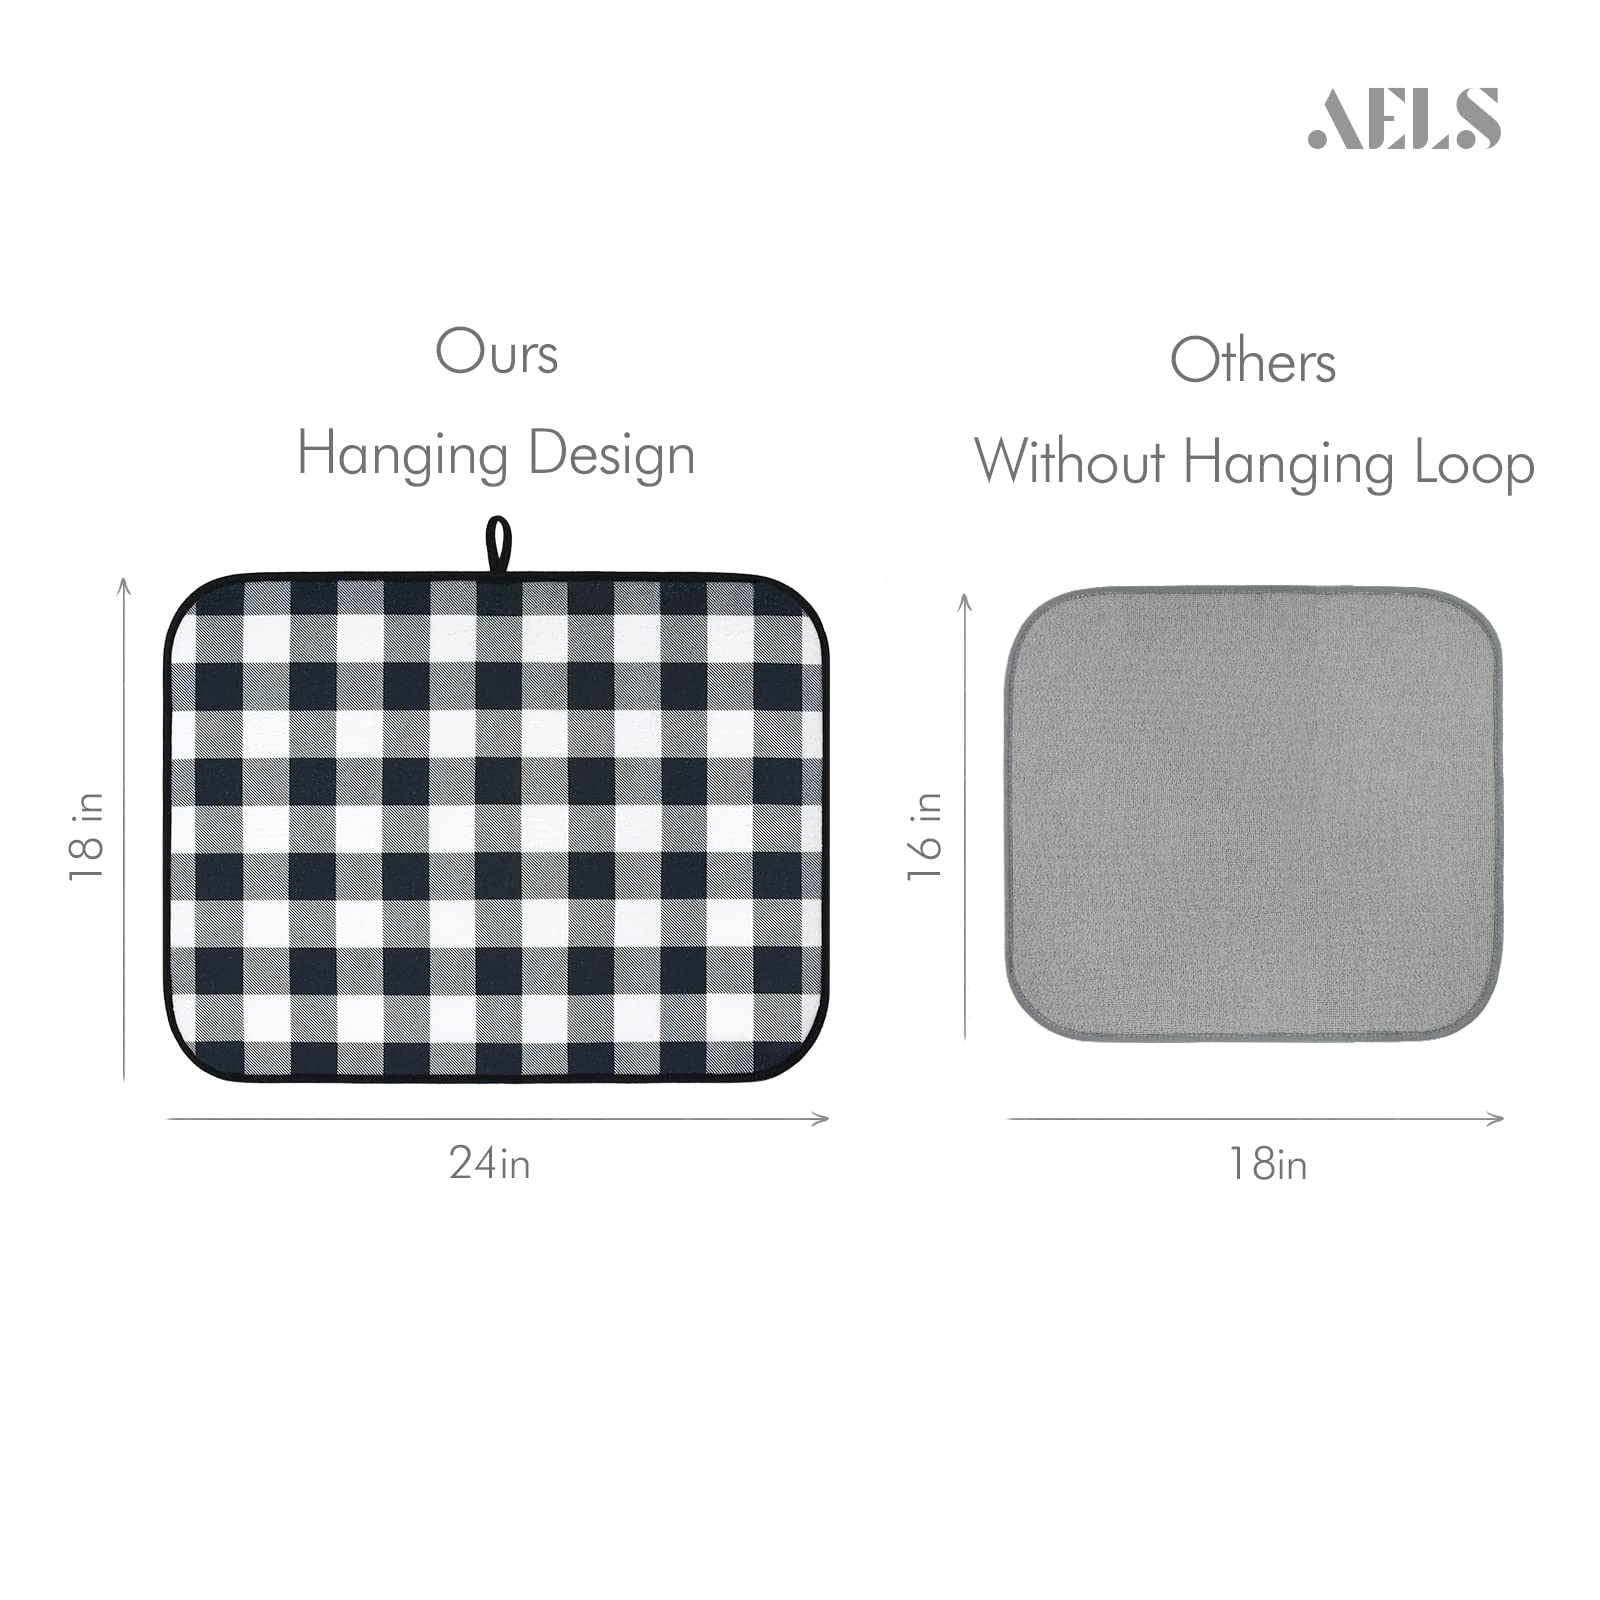 AELS XL 24" x 18" Dish Drying Mat, Set of 2, for Kitchen Counter, Buffalo Check Plaid Tartan Reversible Absorbent Microfiber Dish Drainer/Rack Pads with Hanging Loop